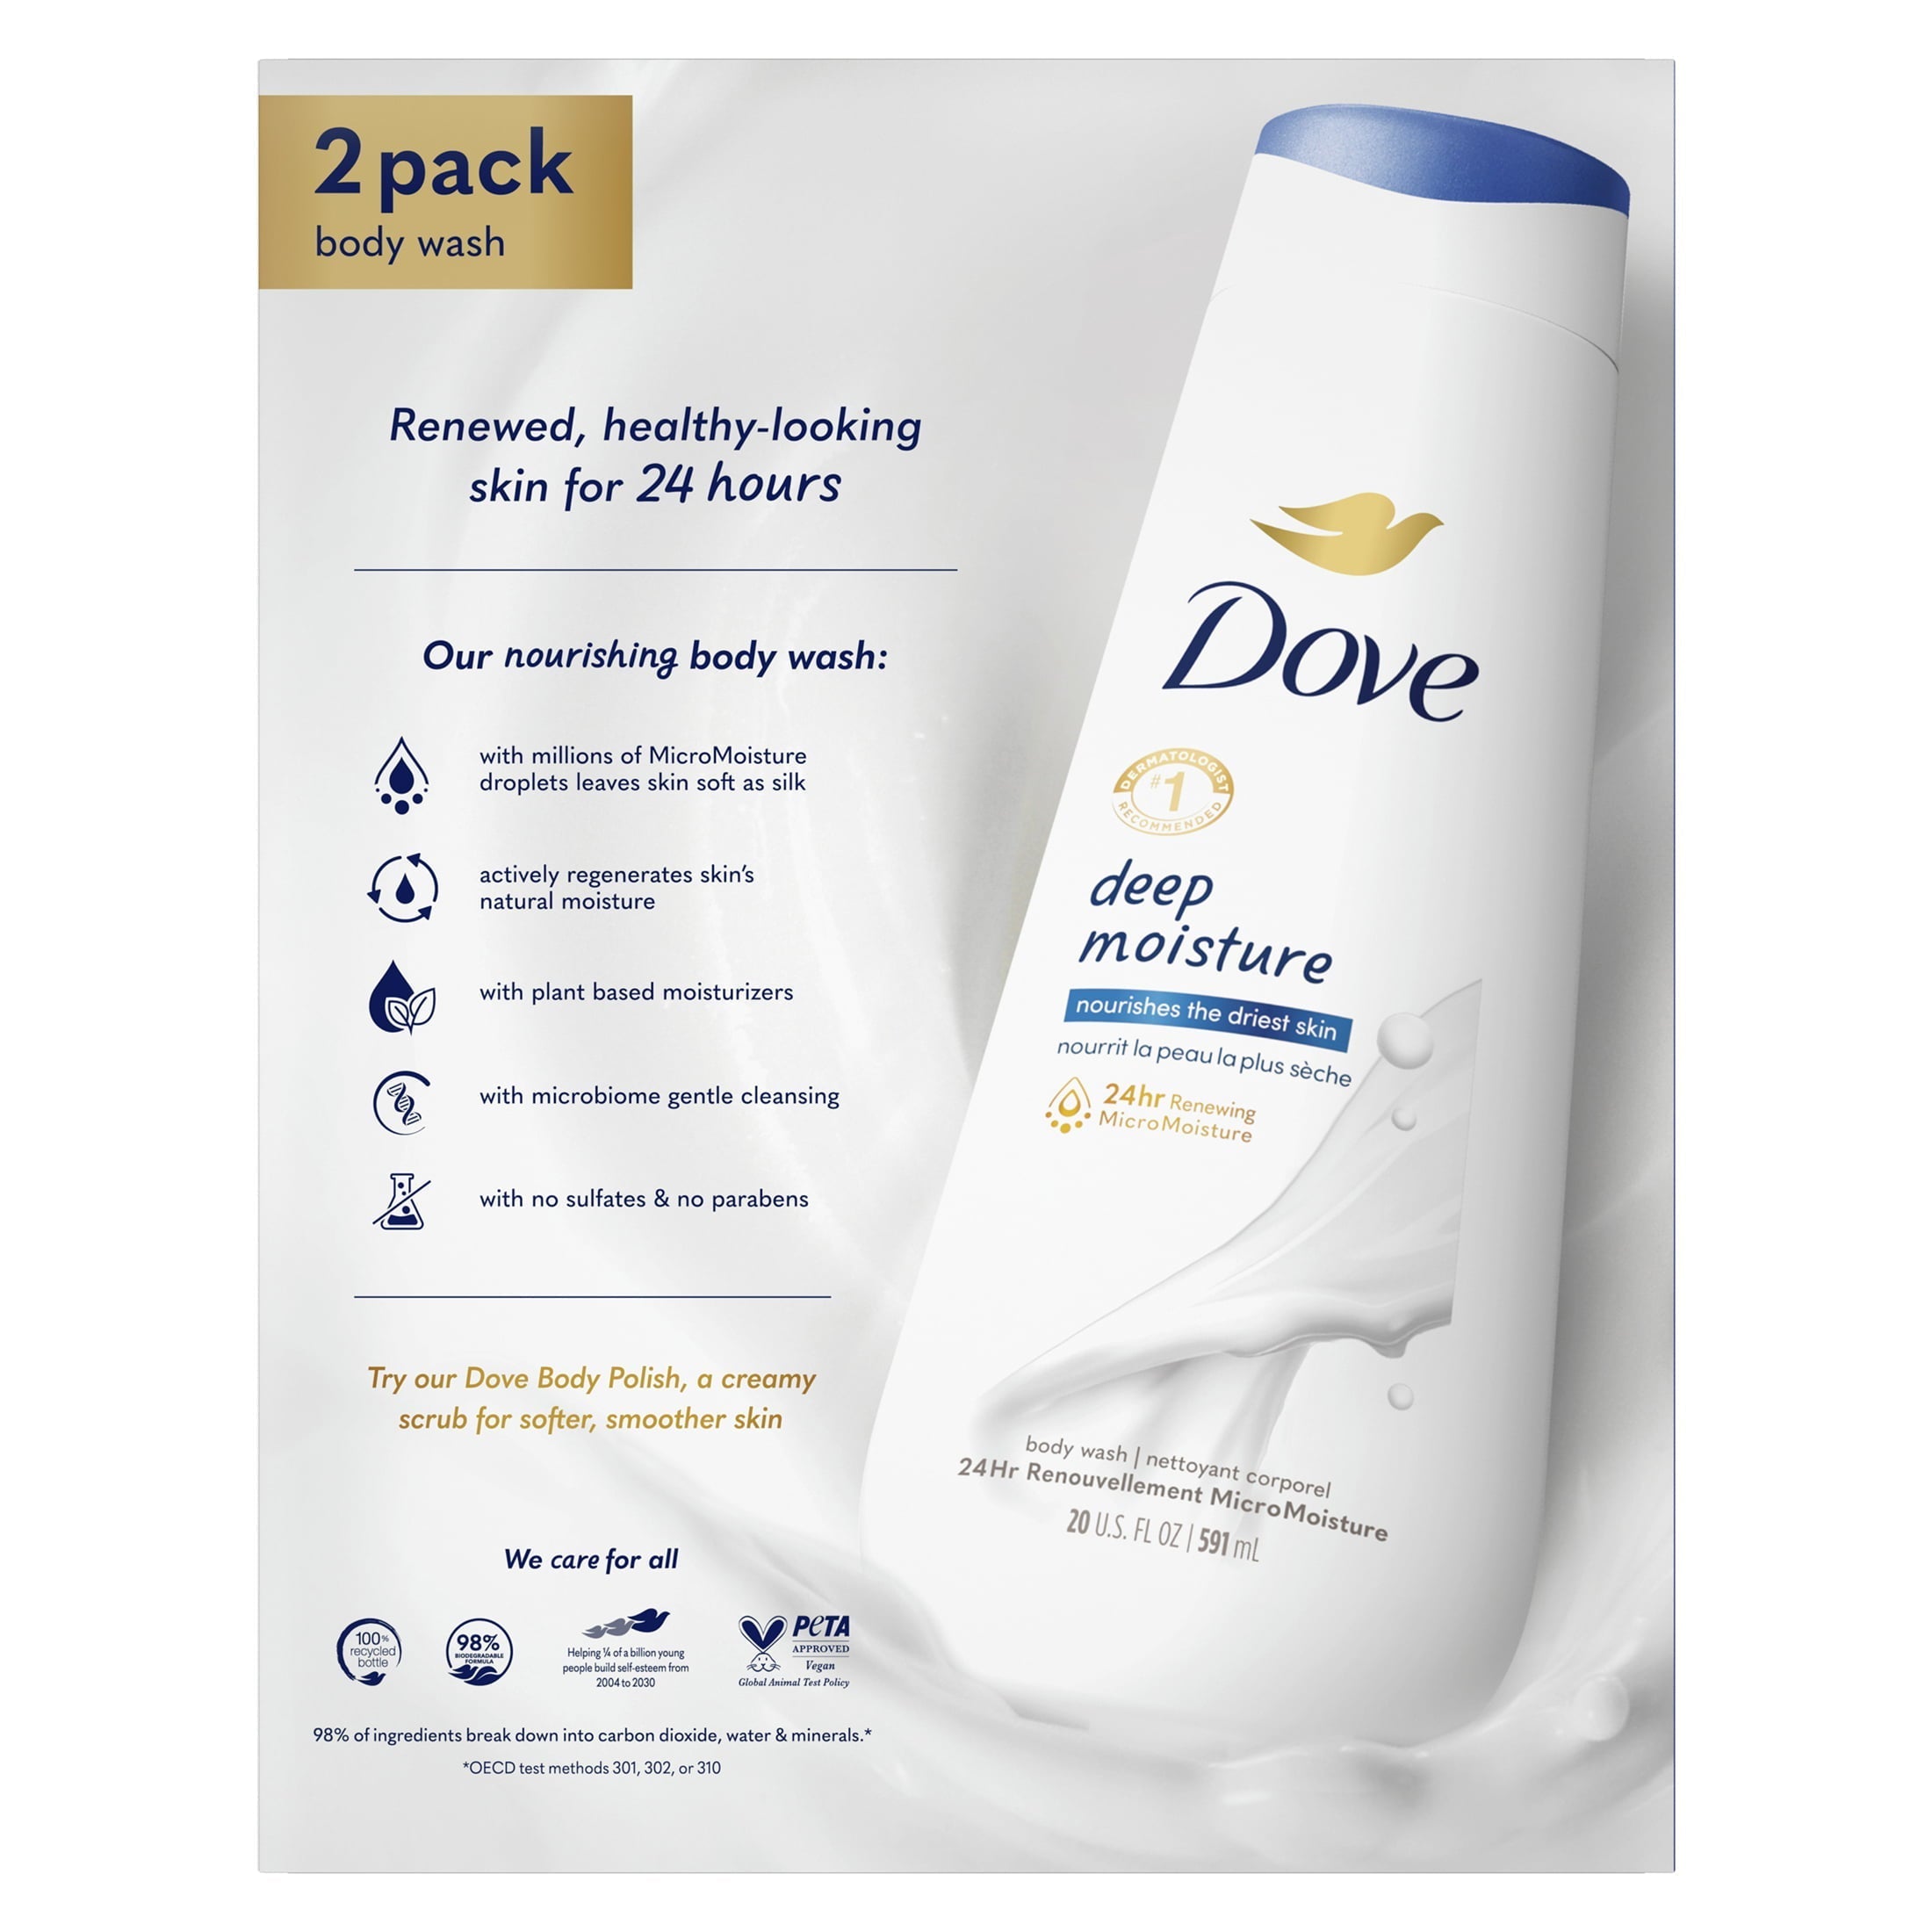 Wholesale prices with free shipping all over United States Dove Deep Moisture Nourishing Liquid Body Wash, 20 oz, 2 Count - Steven Deals